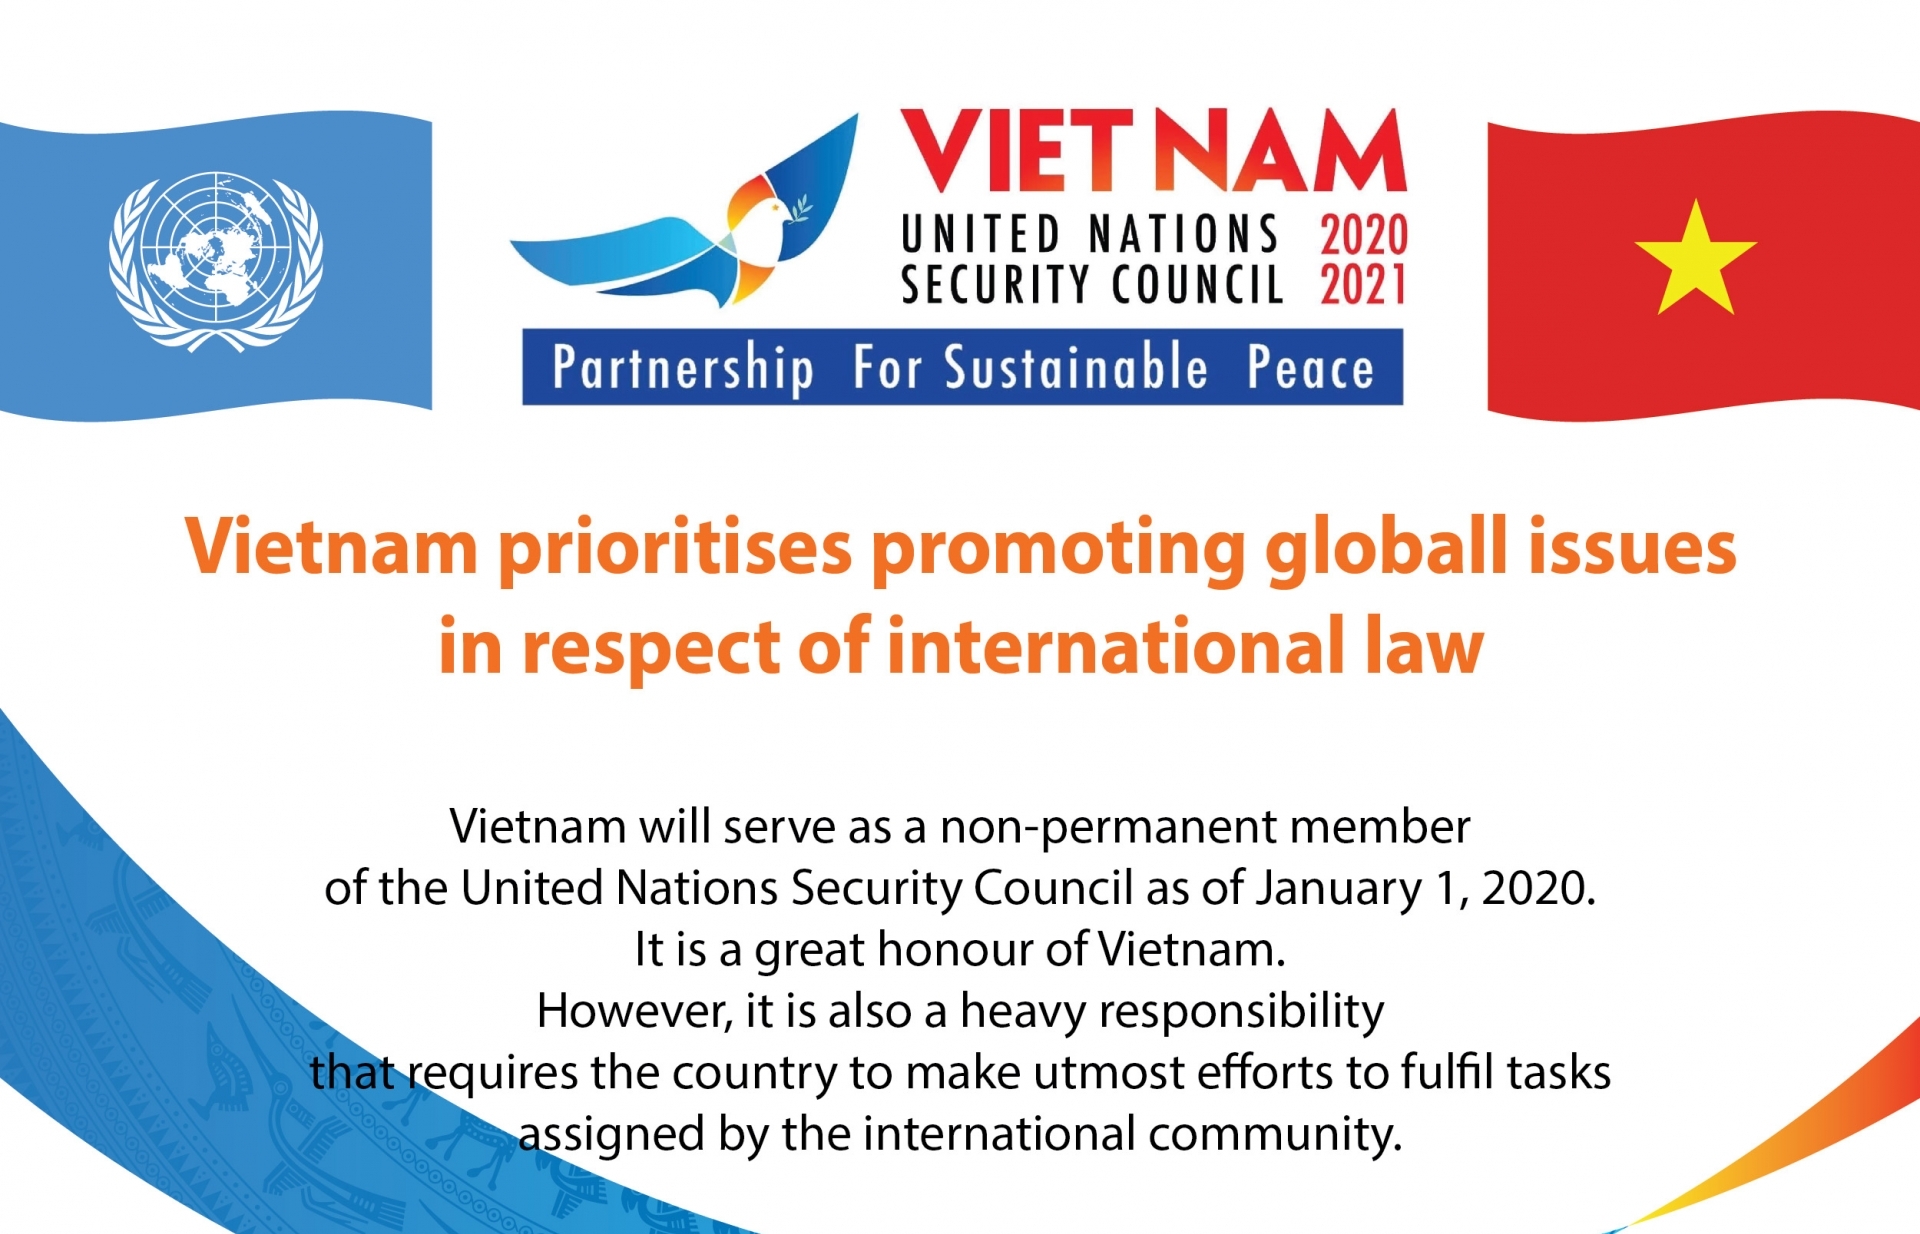 Vietnam prioritises global issues in respect of international law